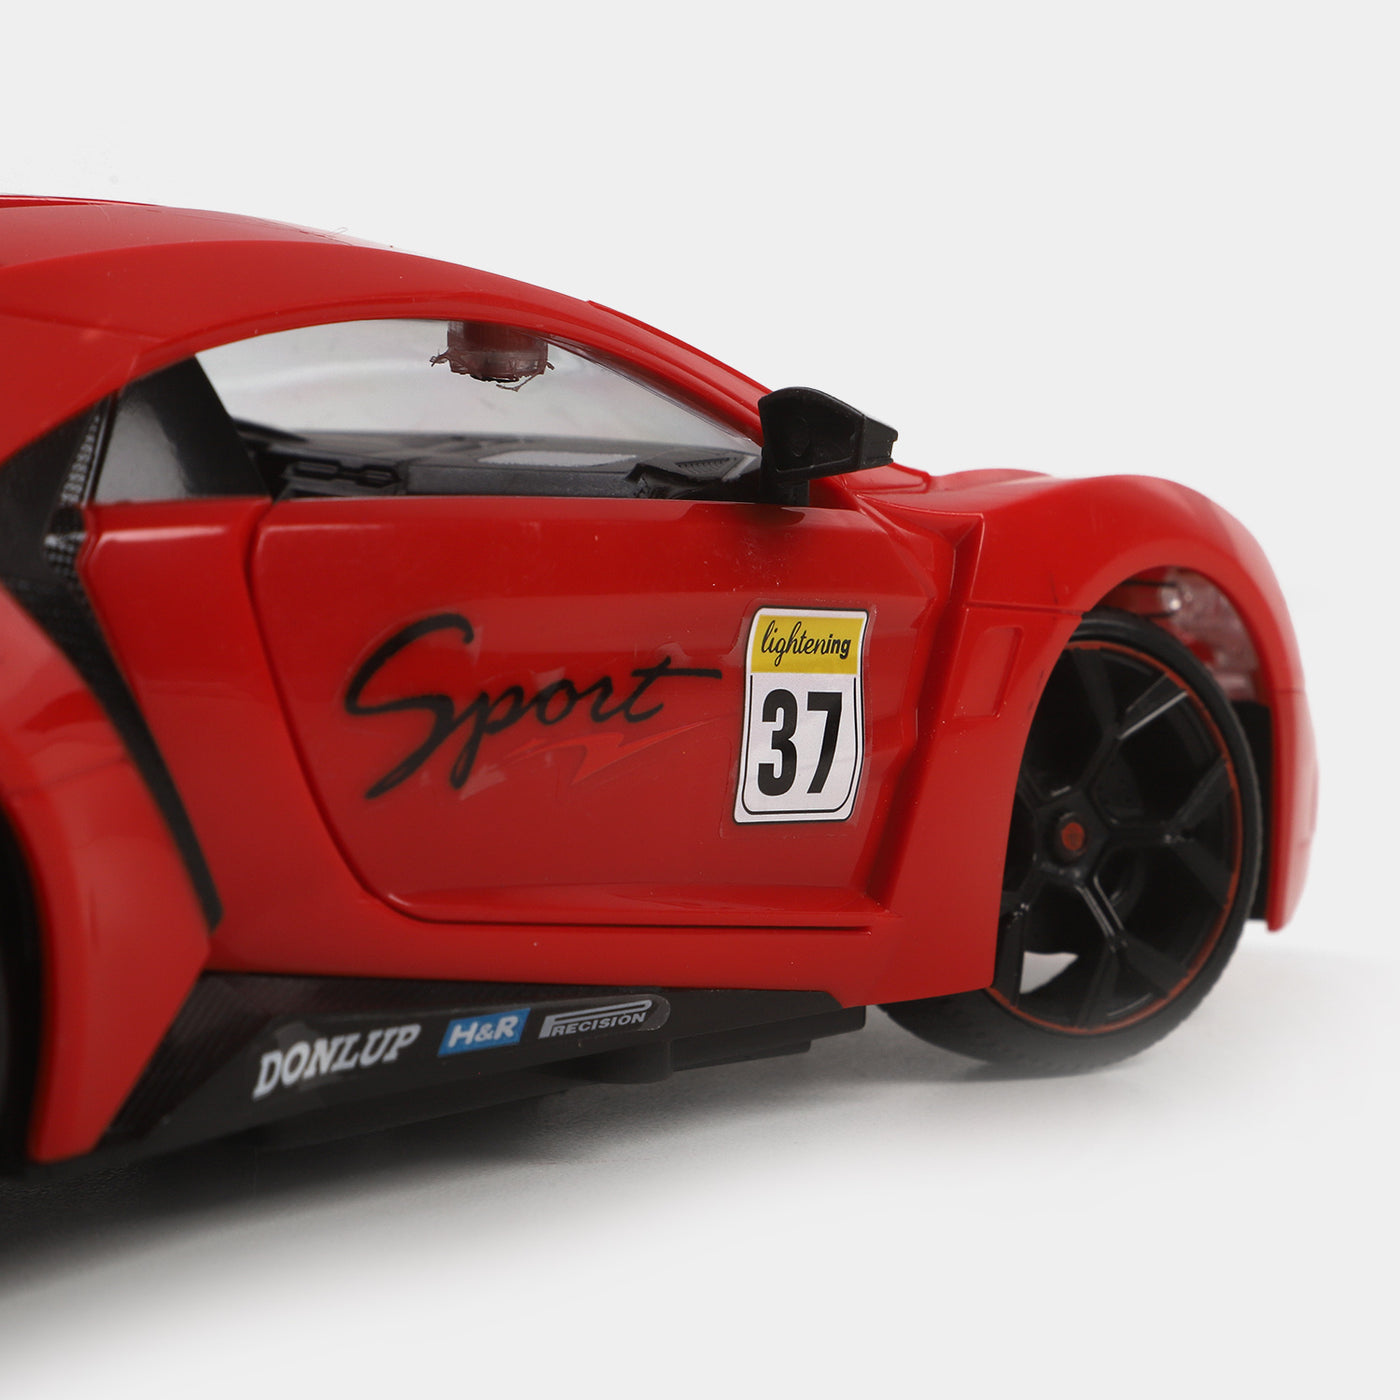 Top Speed Car R/C Toy For kids